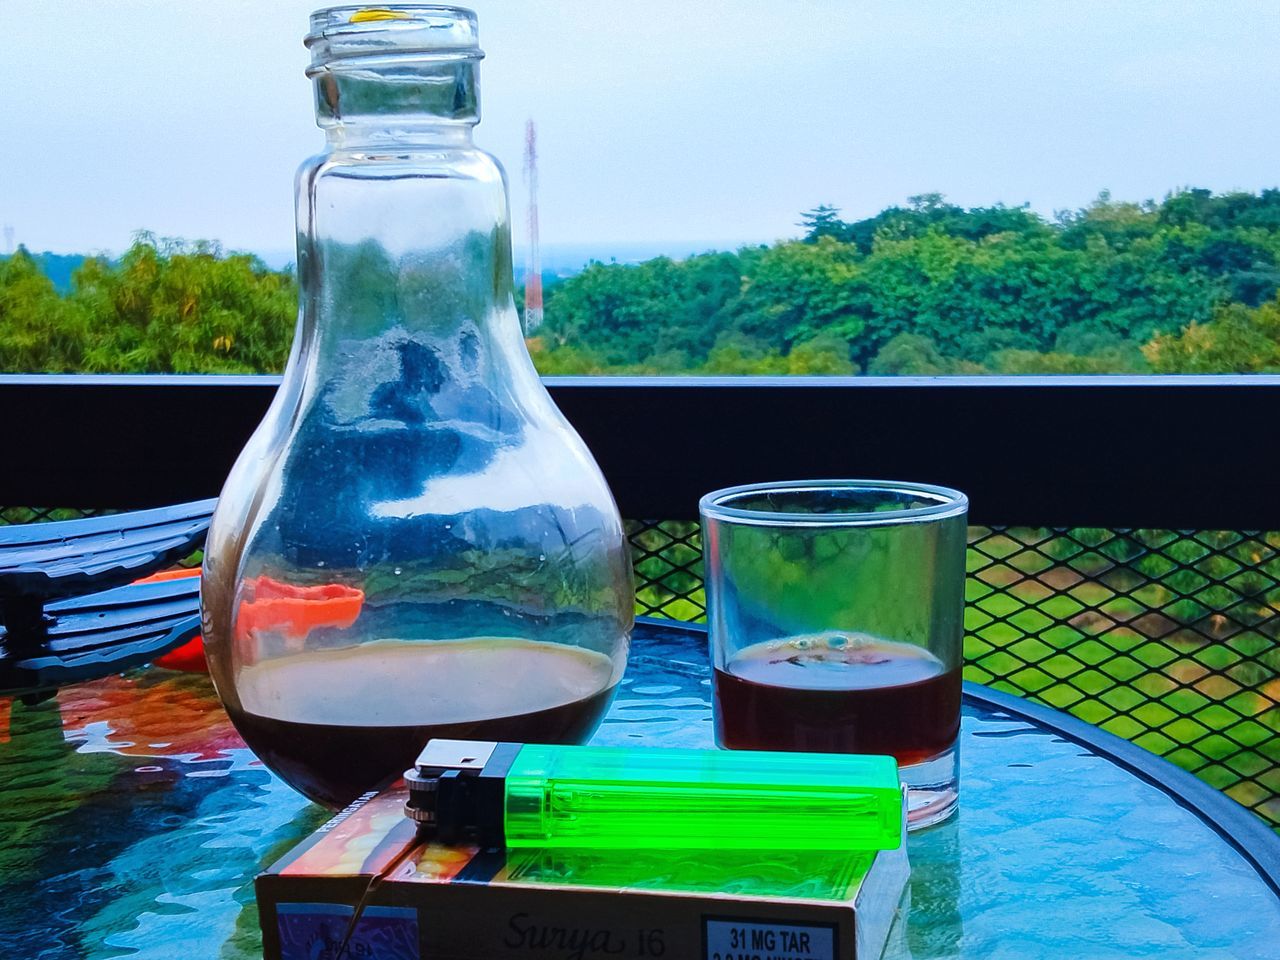 water, container, nature, bottle, refreshment, food and drink, drink, plant, glass, no people, green, table, day, drinking glass, sky, outdoors, tree, food, blue, soft drink, summer, transparent, household equipment, drinkware